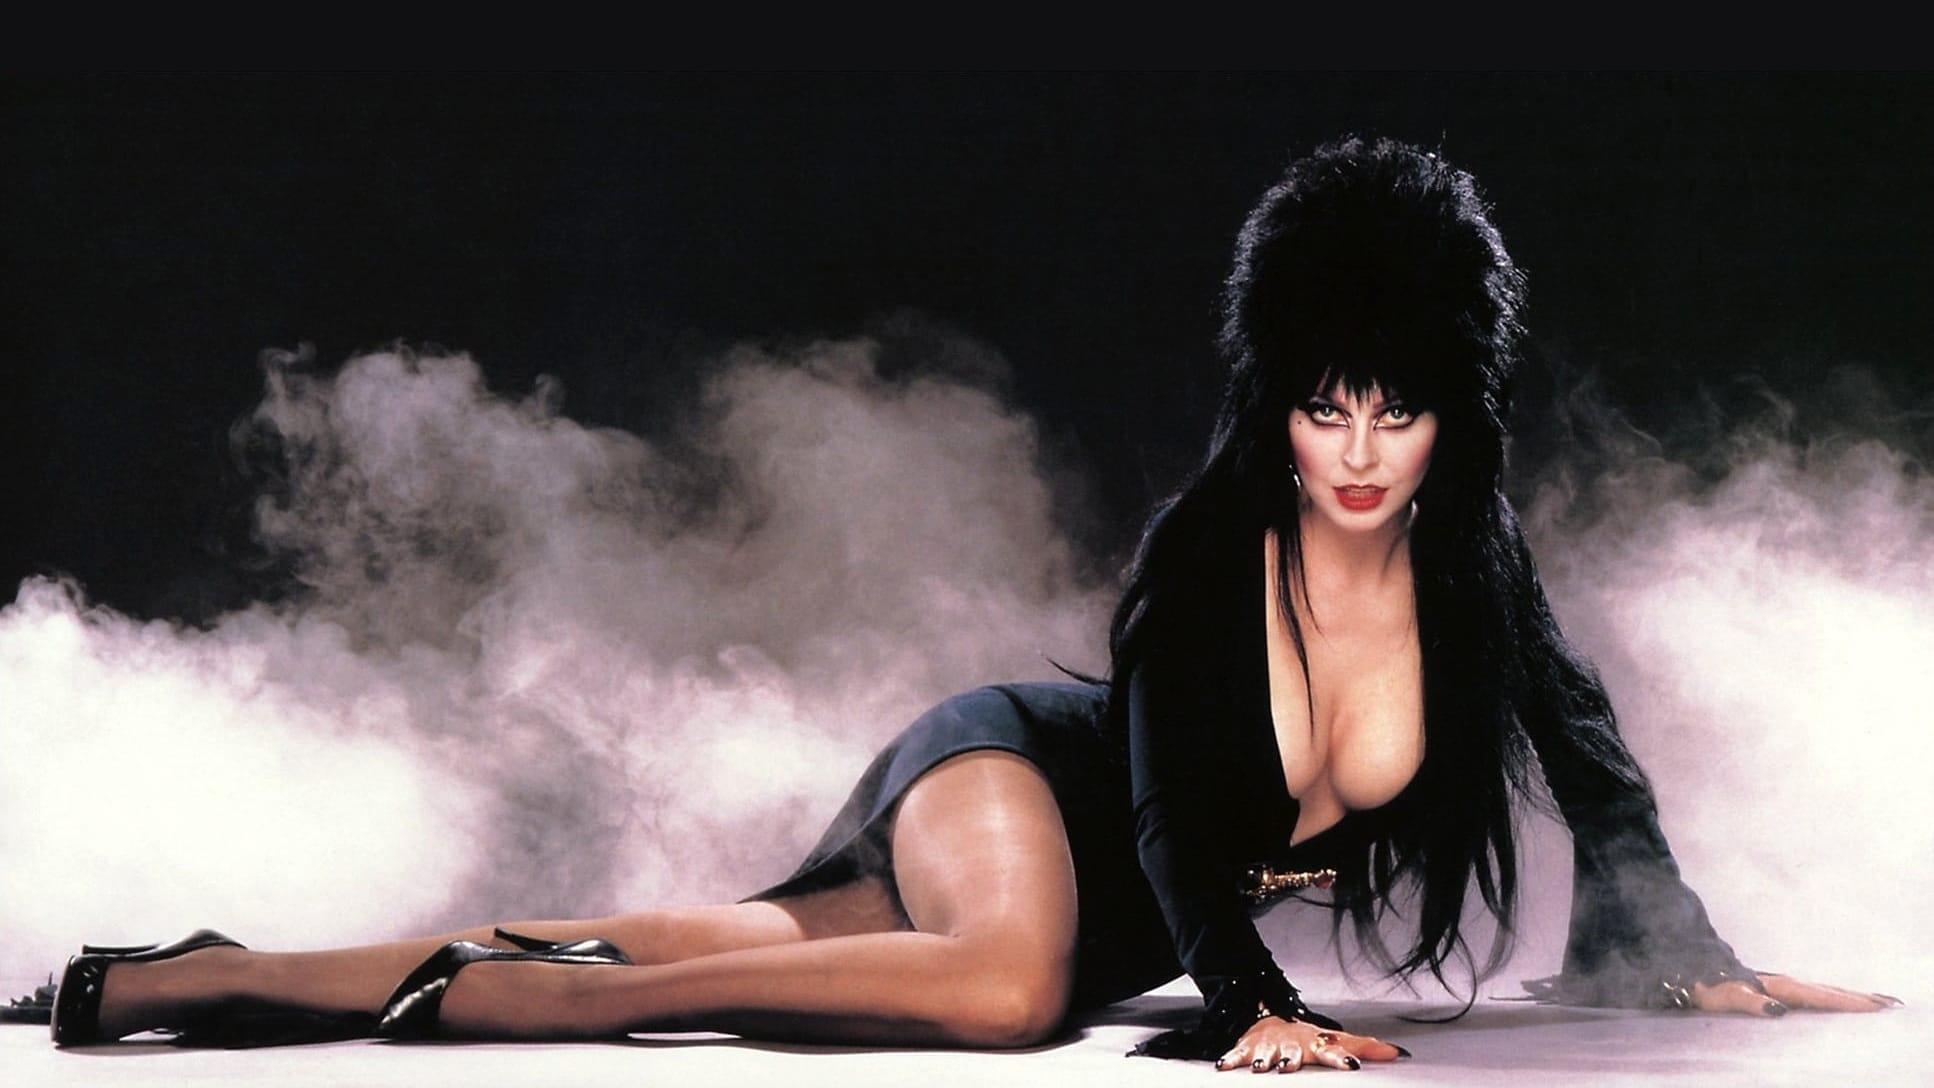 Too Macabre: The Making of Elvira, Mistress of the Dark backdrop